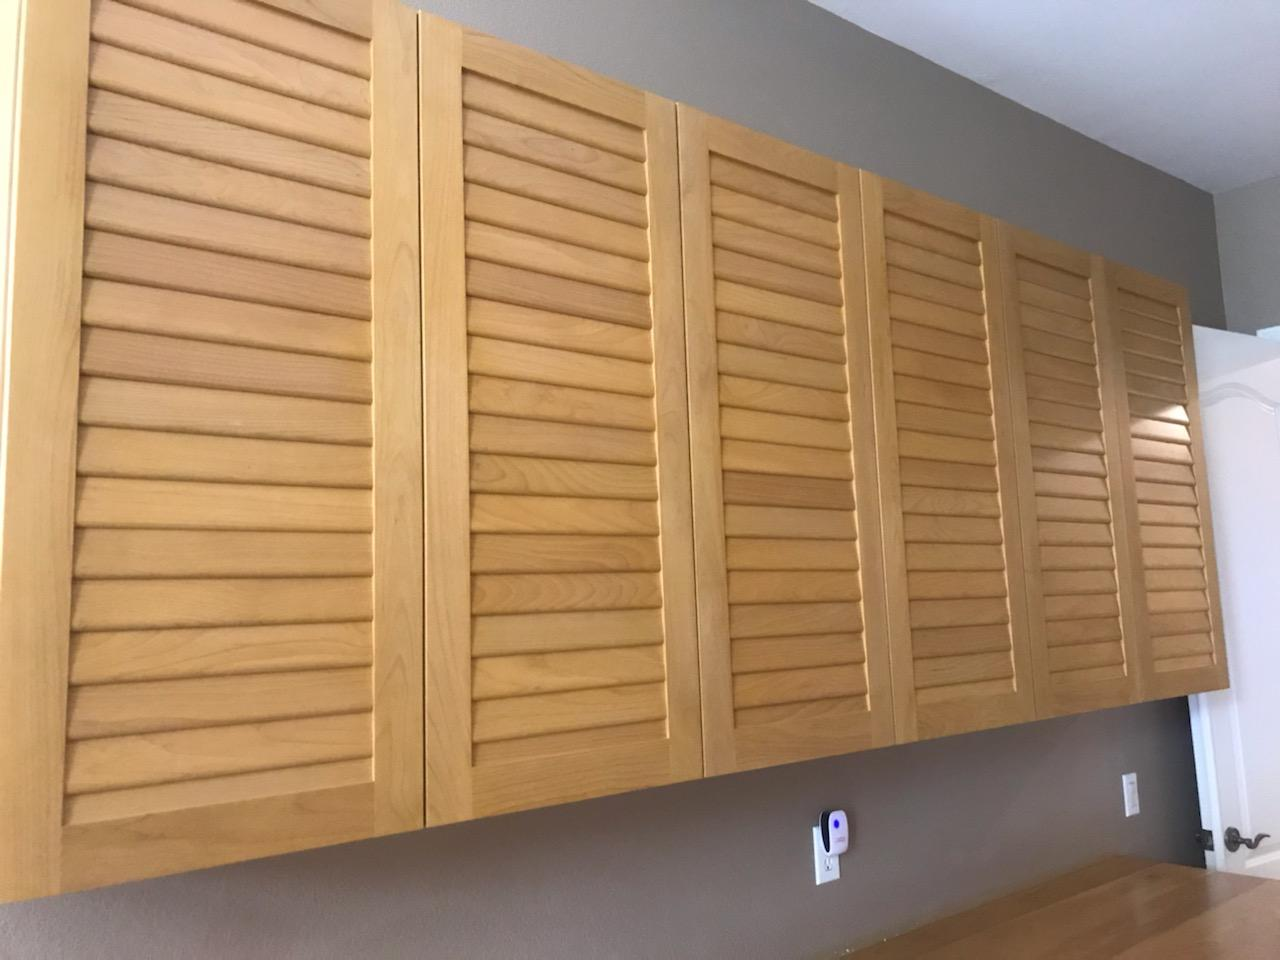 Slatted cabinets with a hard wood finish